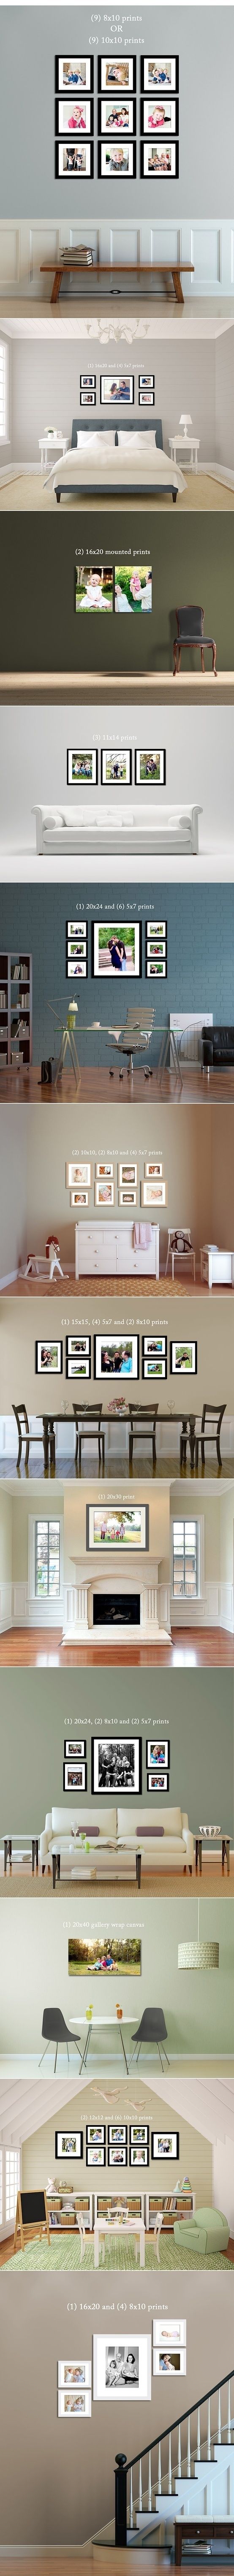 Ideas for hanging photos